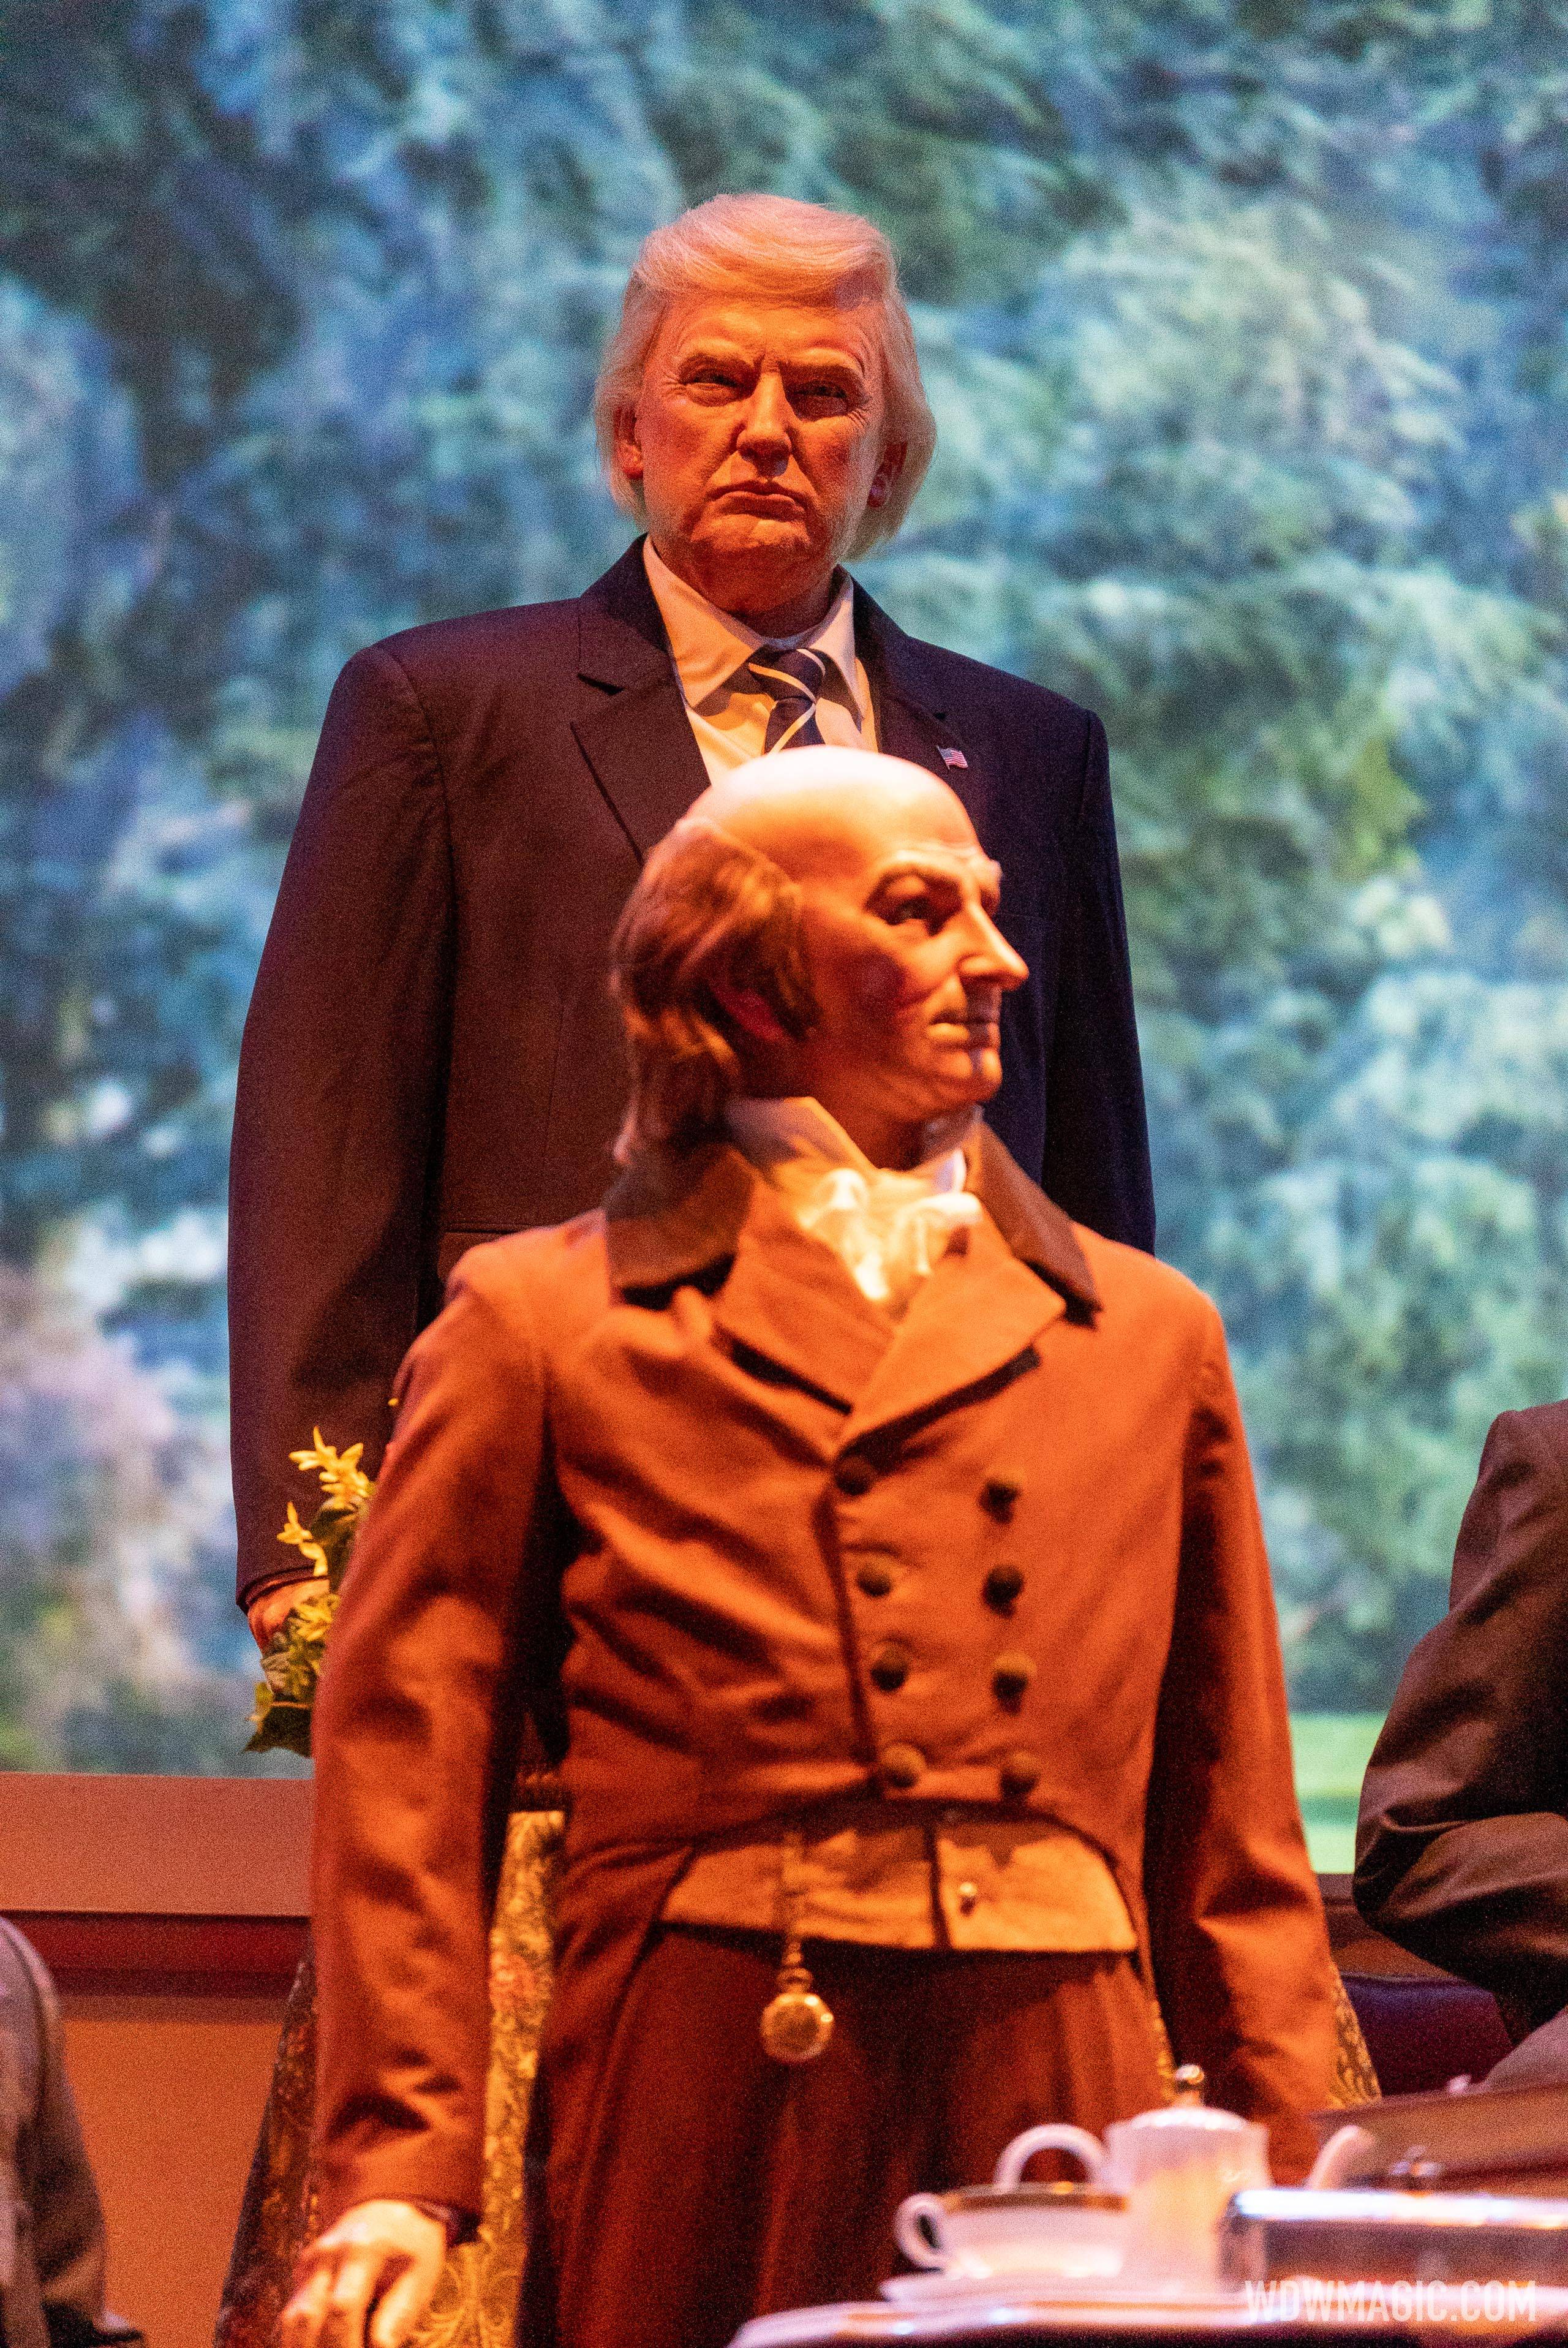 Donald Trump in new location in Hall of Presidents